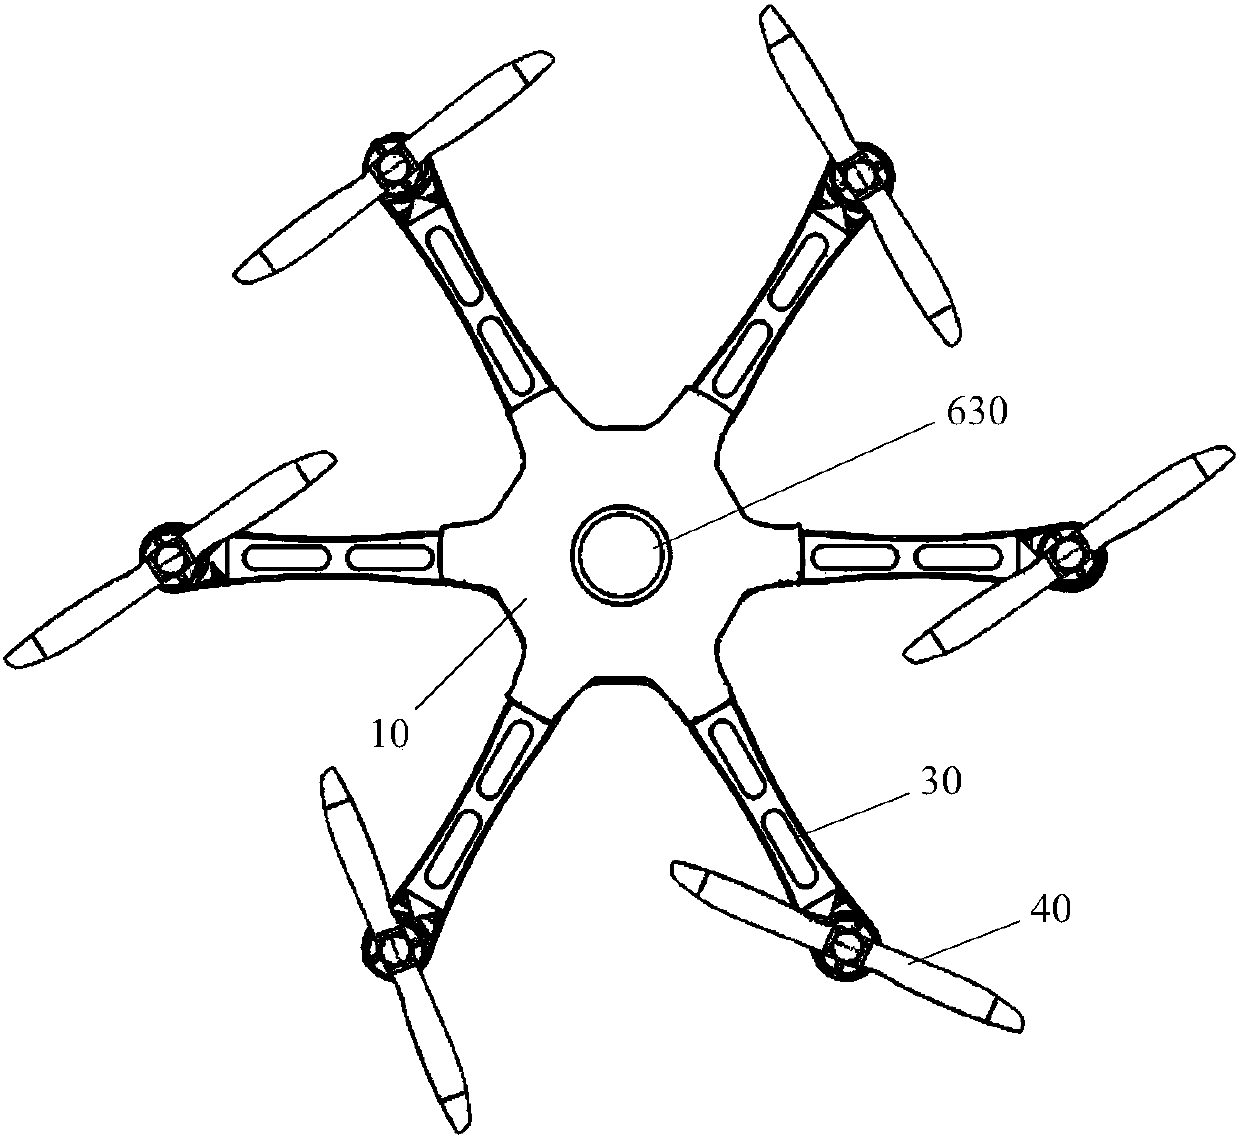 Unmanned aerial vehicle with beam lamp and application